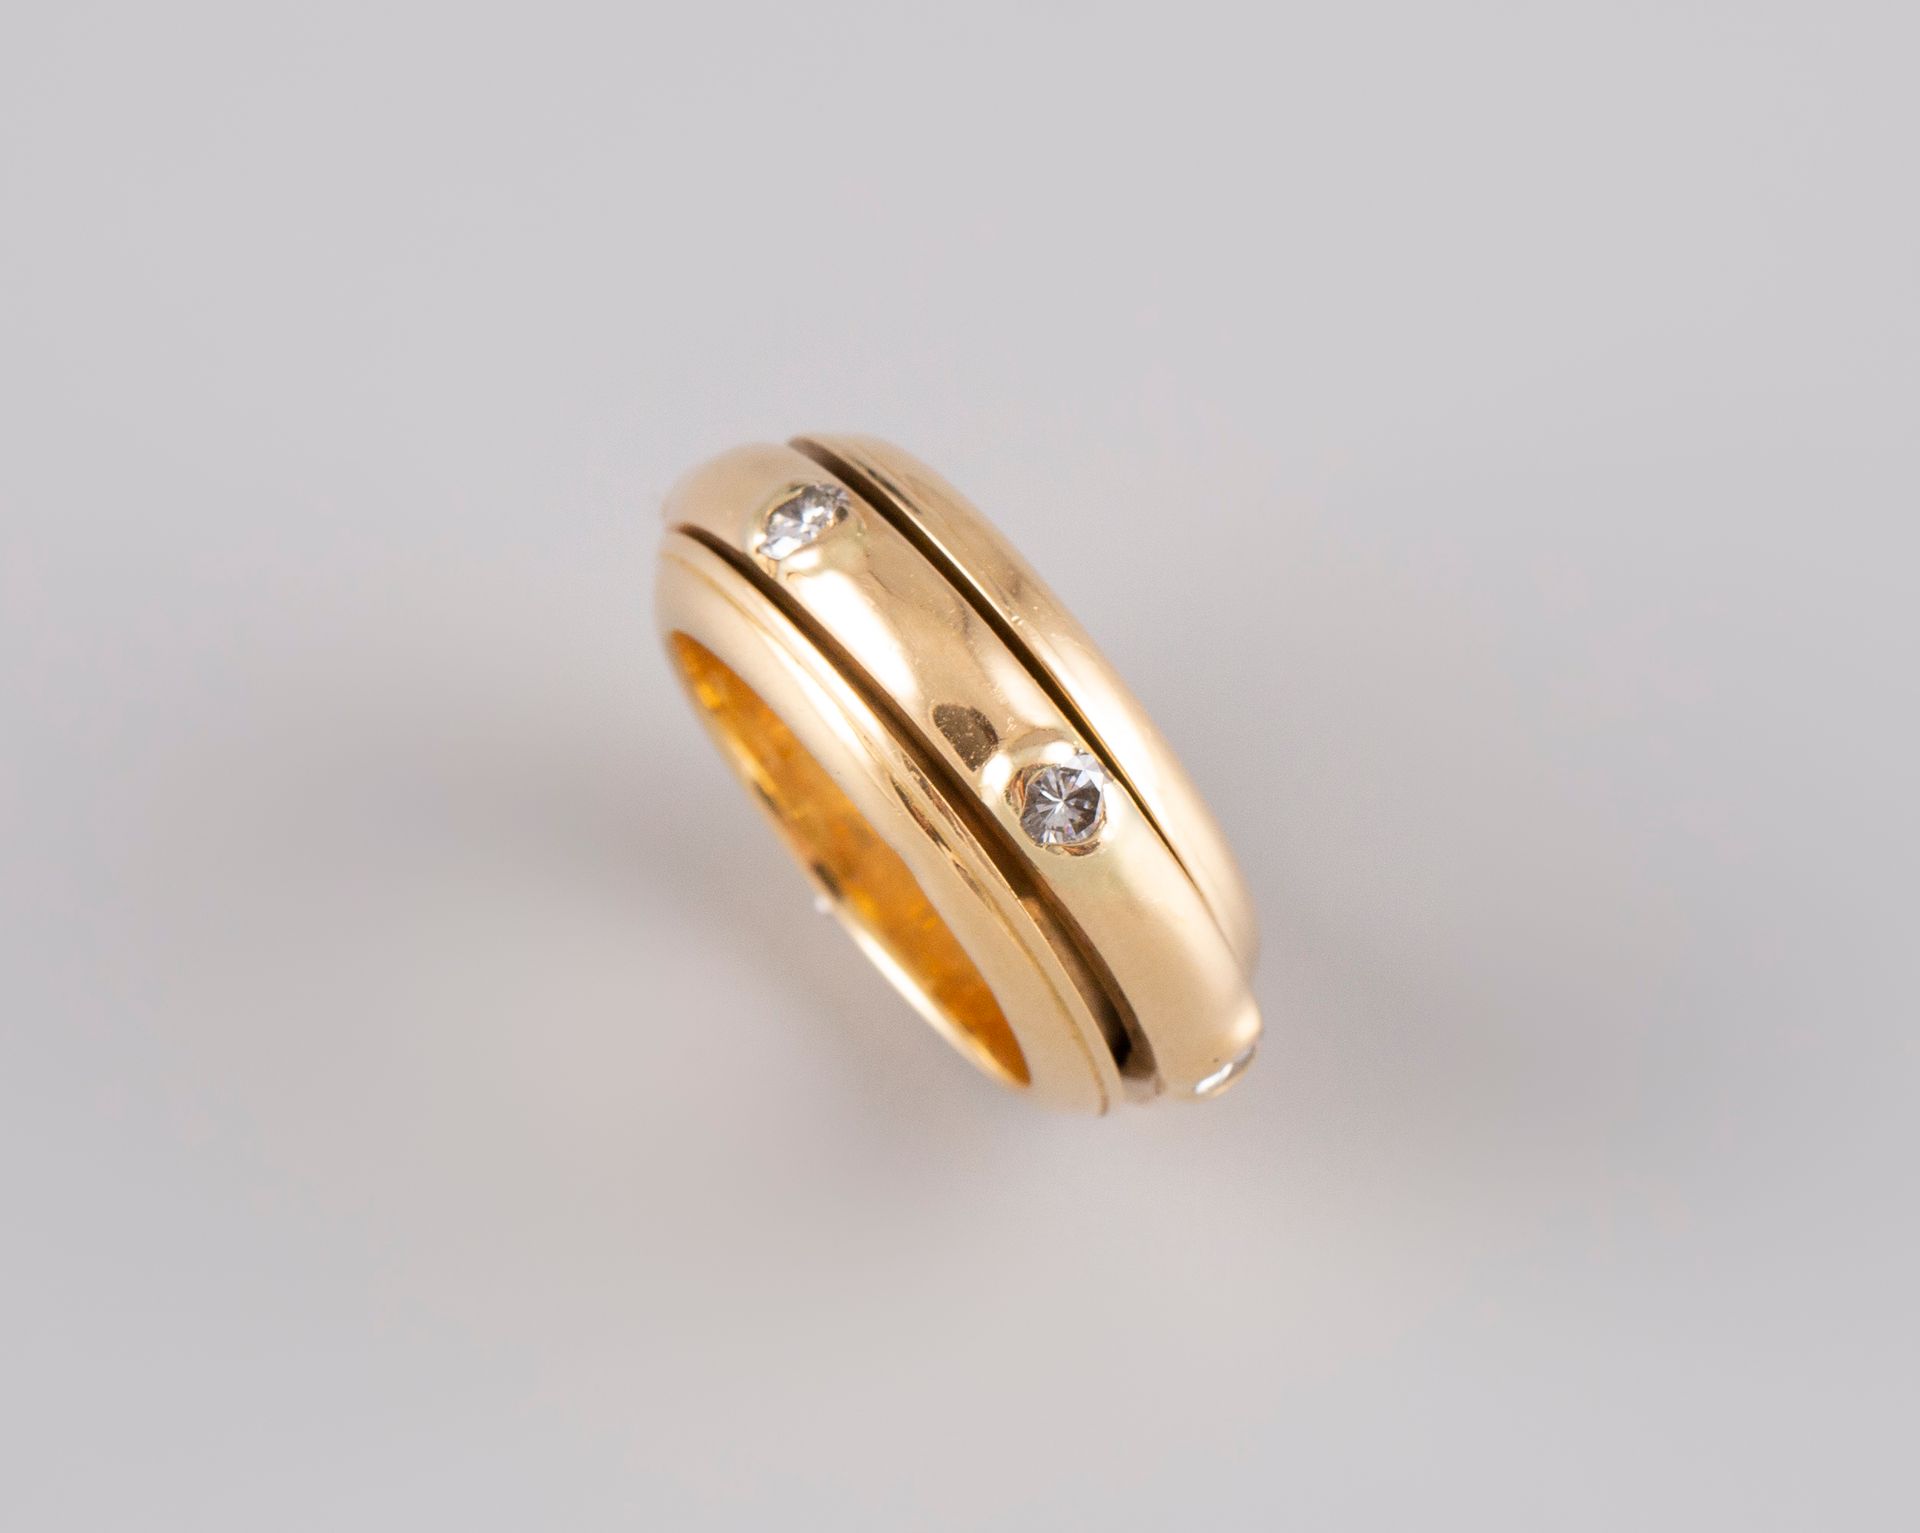 Null Ring in 18K yellow gold 750° set with small diamonds. TDD 51. PB:10,4g